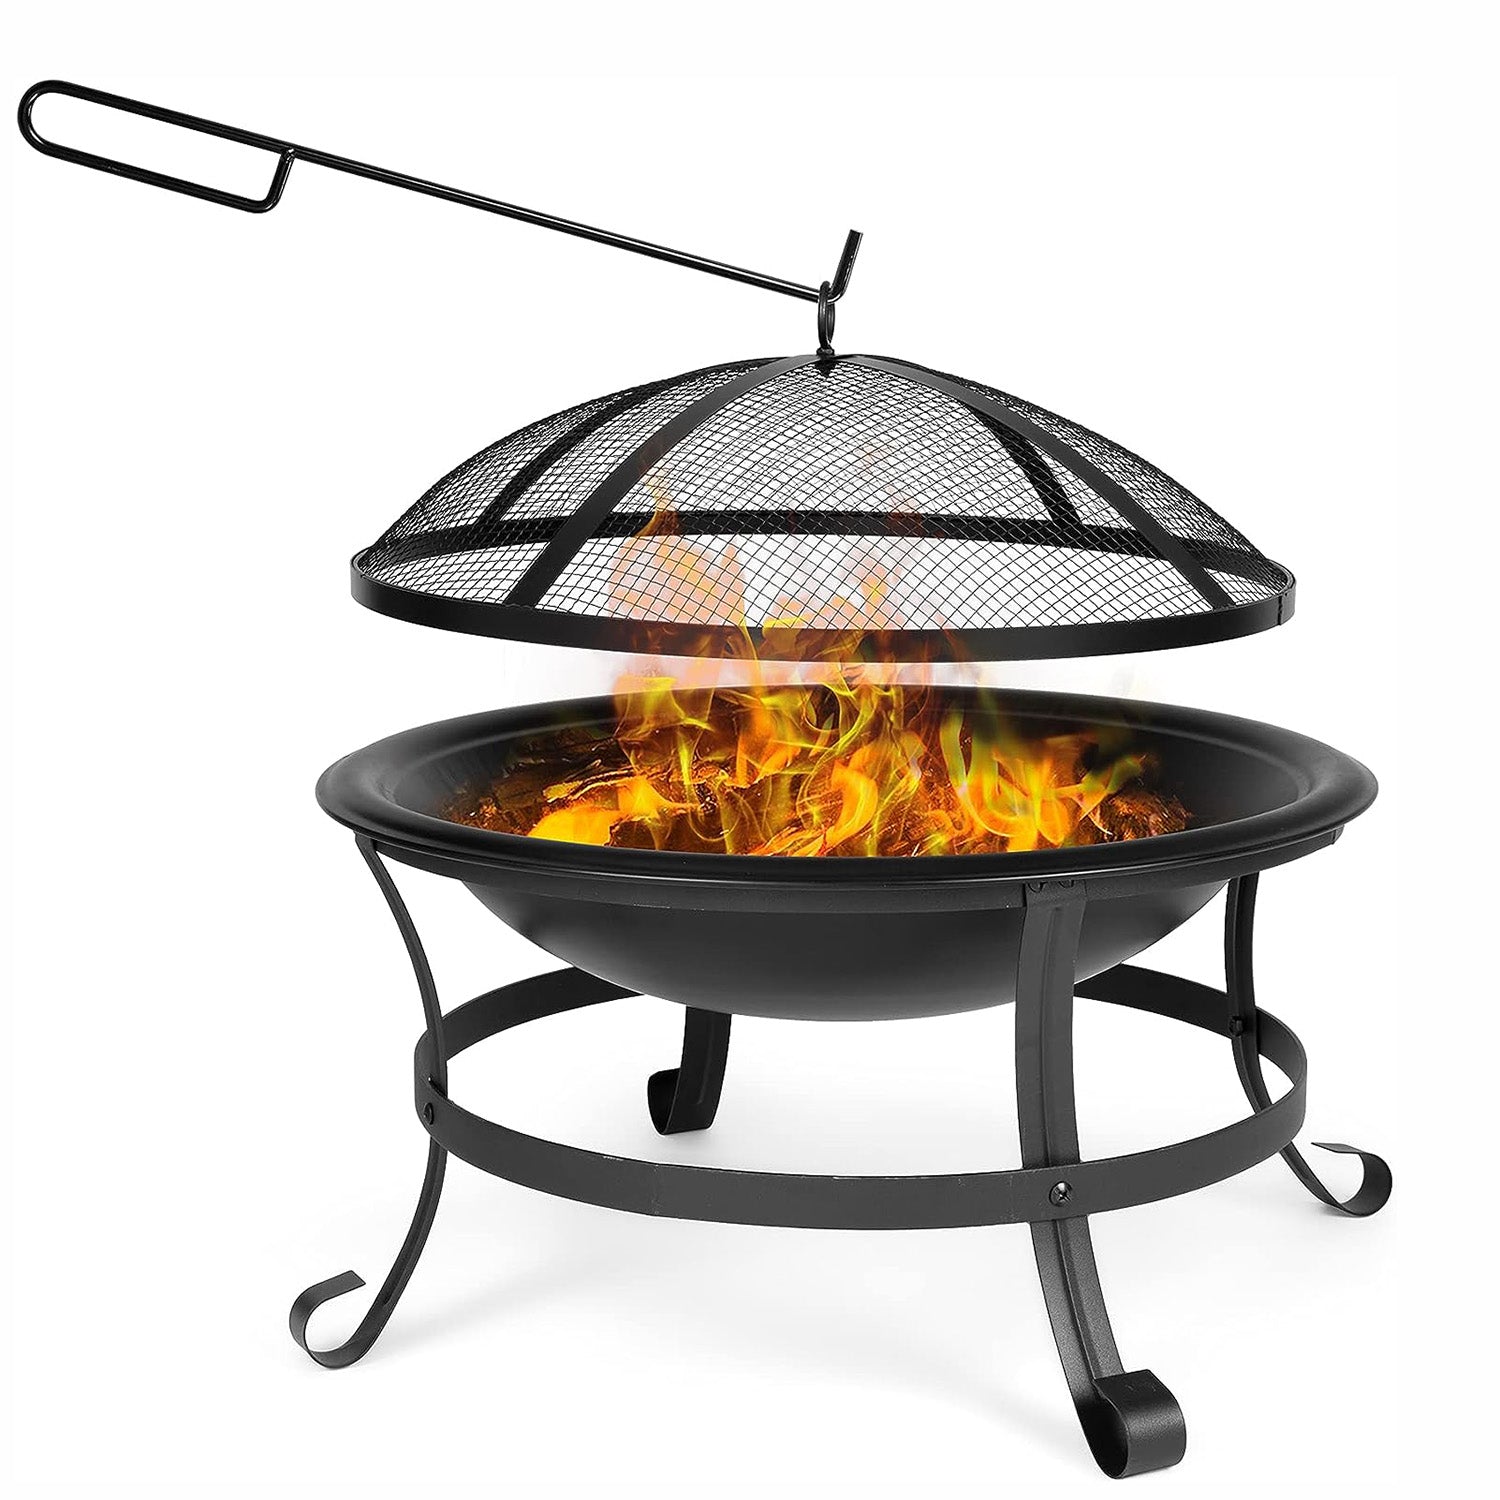 LUCKYERMORE 22” Round Outdoor Fire Pits Patio Garden Fireplace BBQ Grill with Spark Mesh Cover